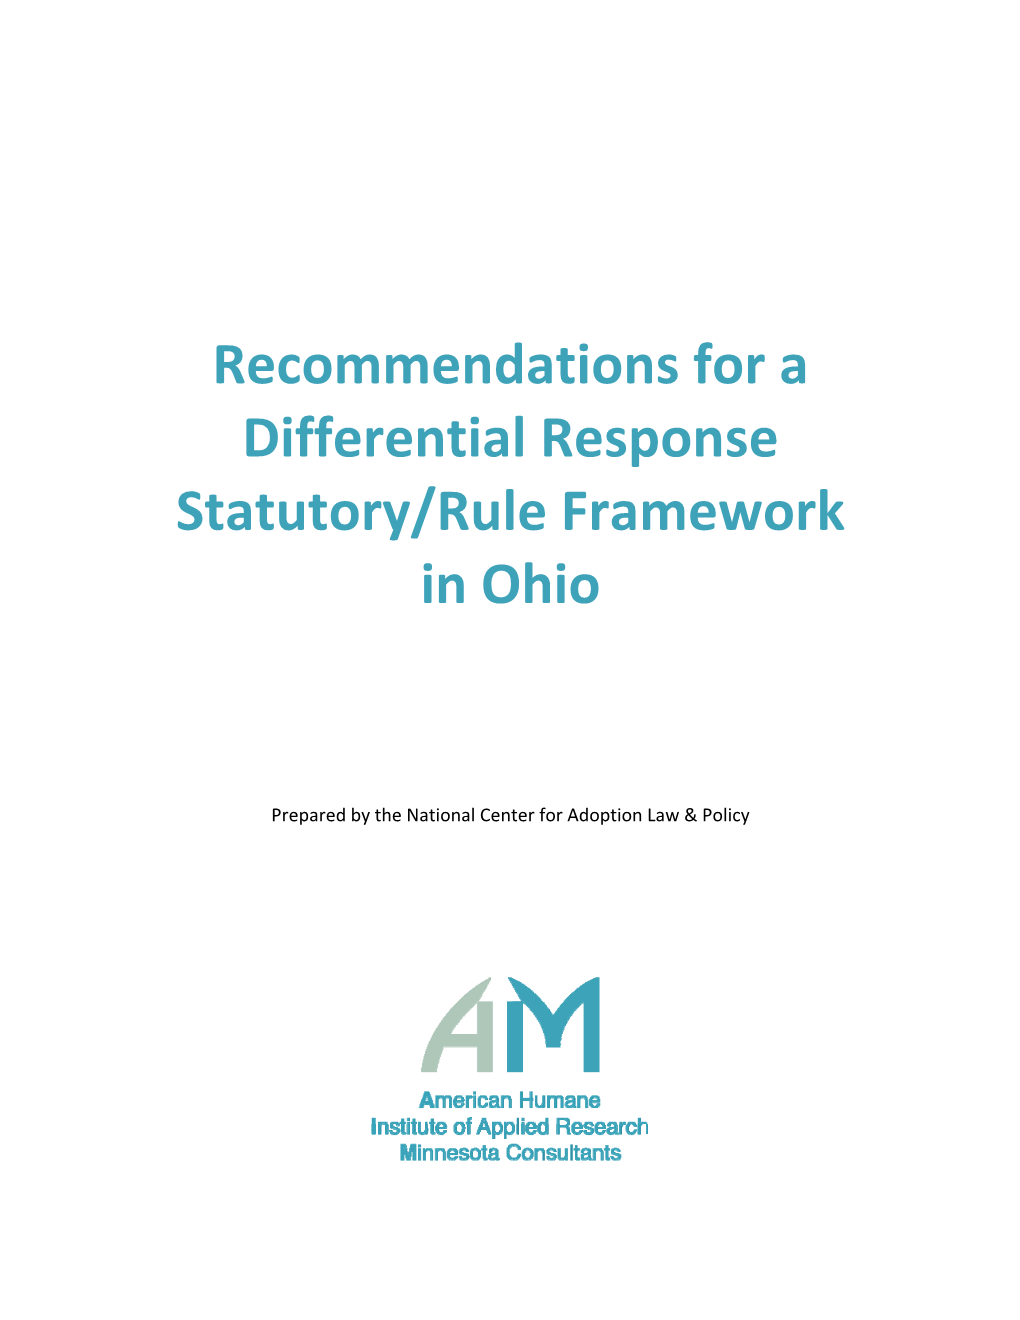 Recommendations for a Differential Response Statutory/Rule Framework in Ohio